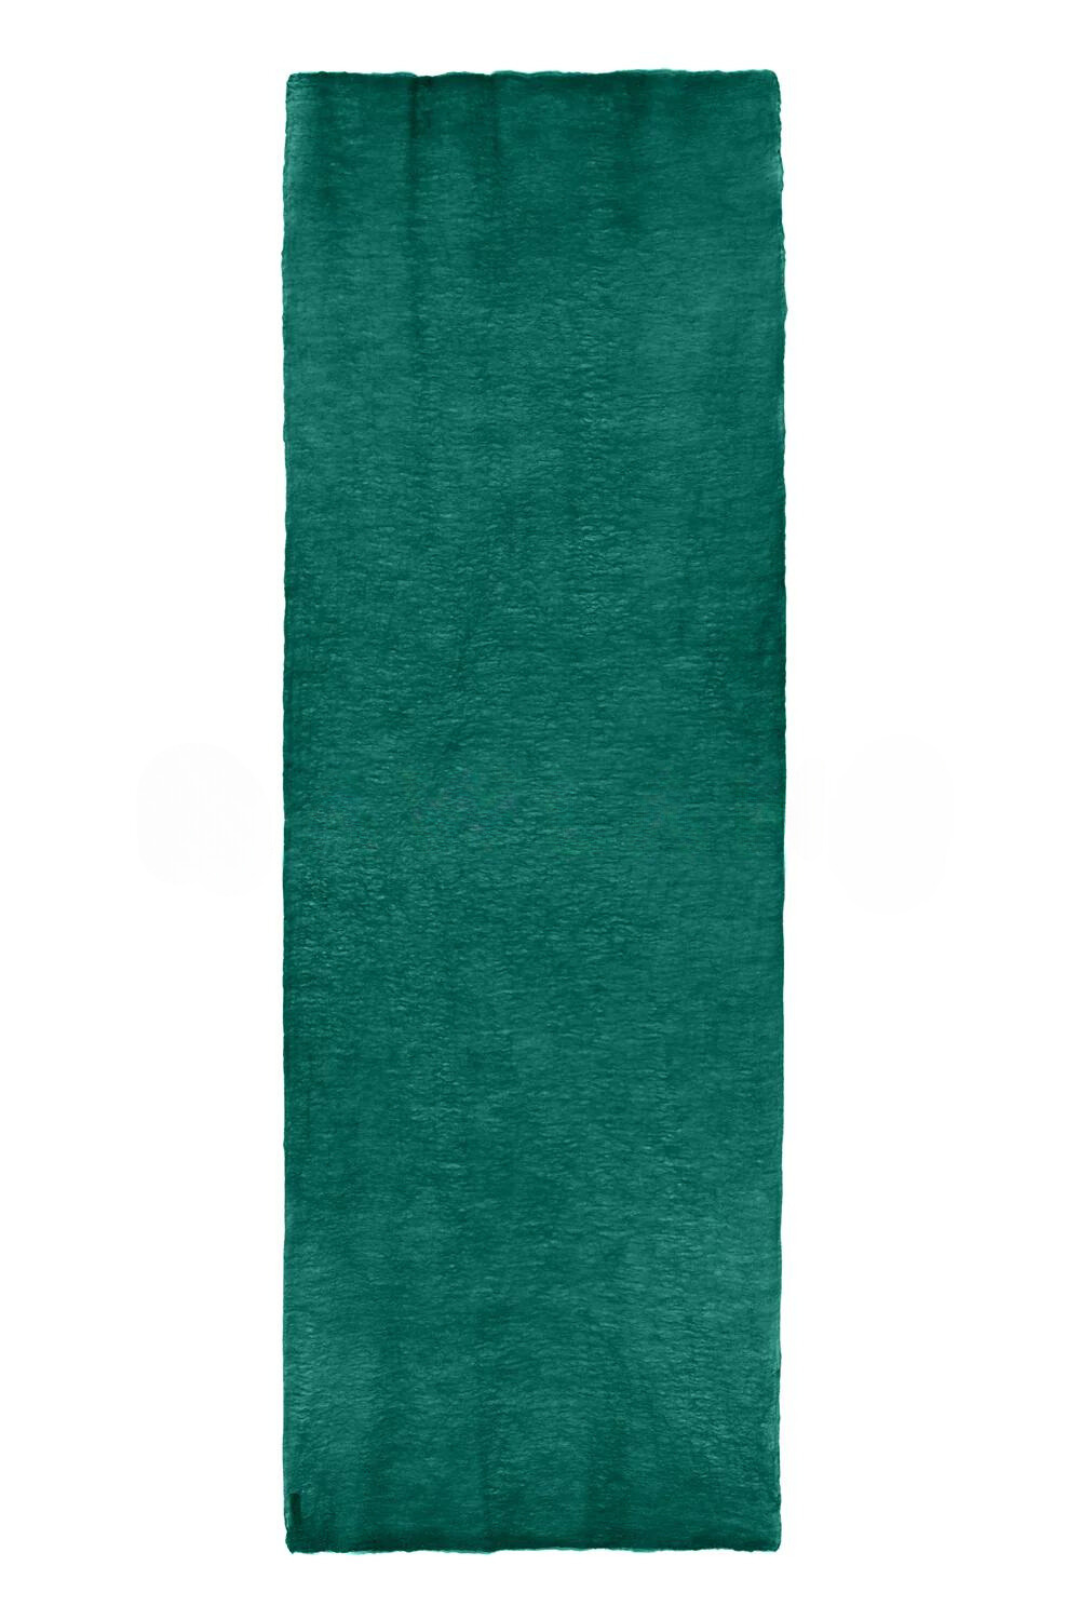 Simply Sparge Micro Baby Cashmere Stole - Dark Teal